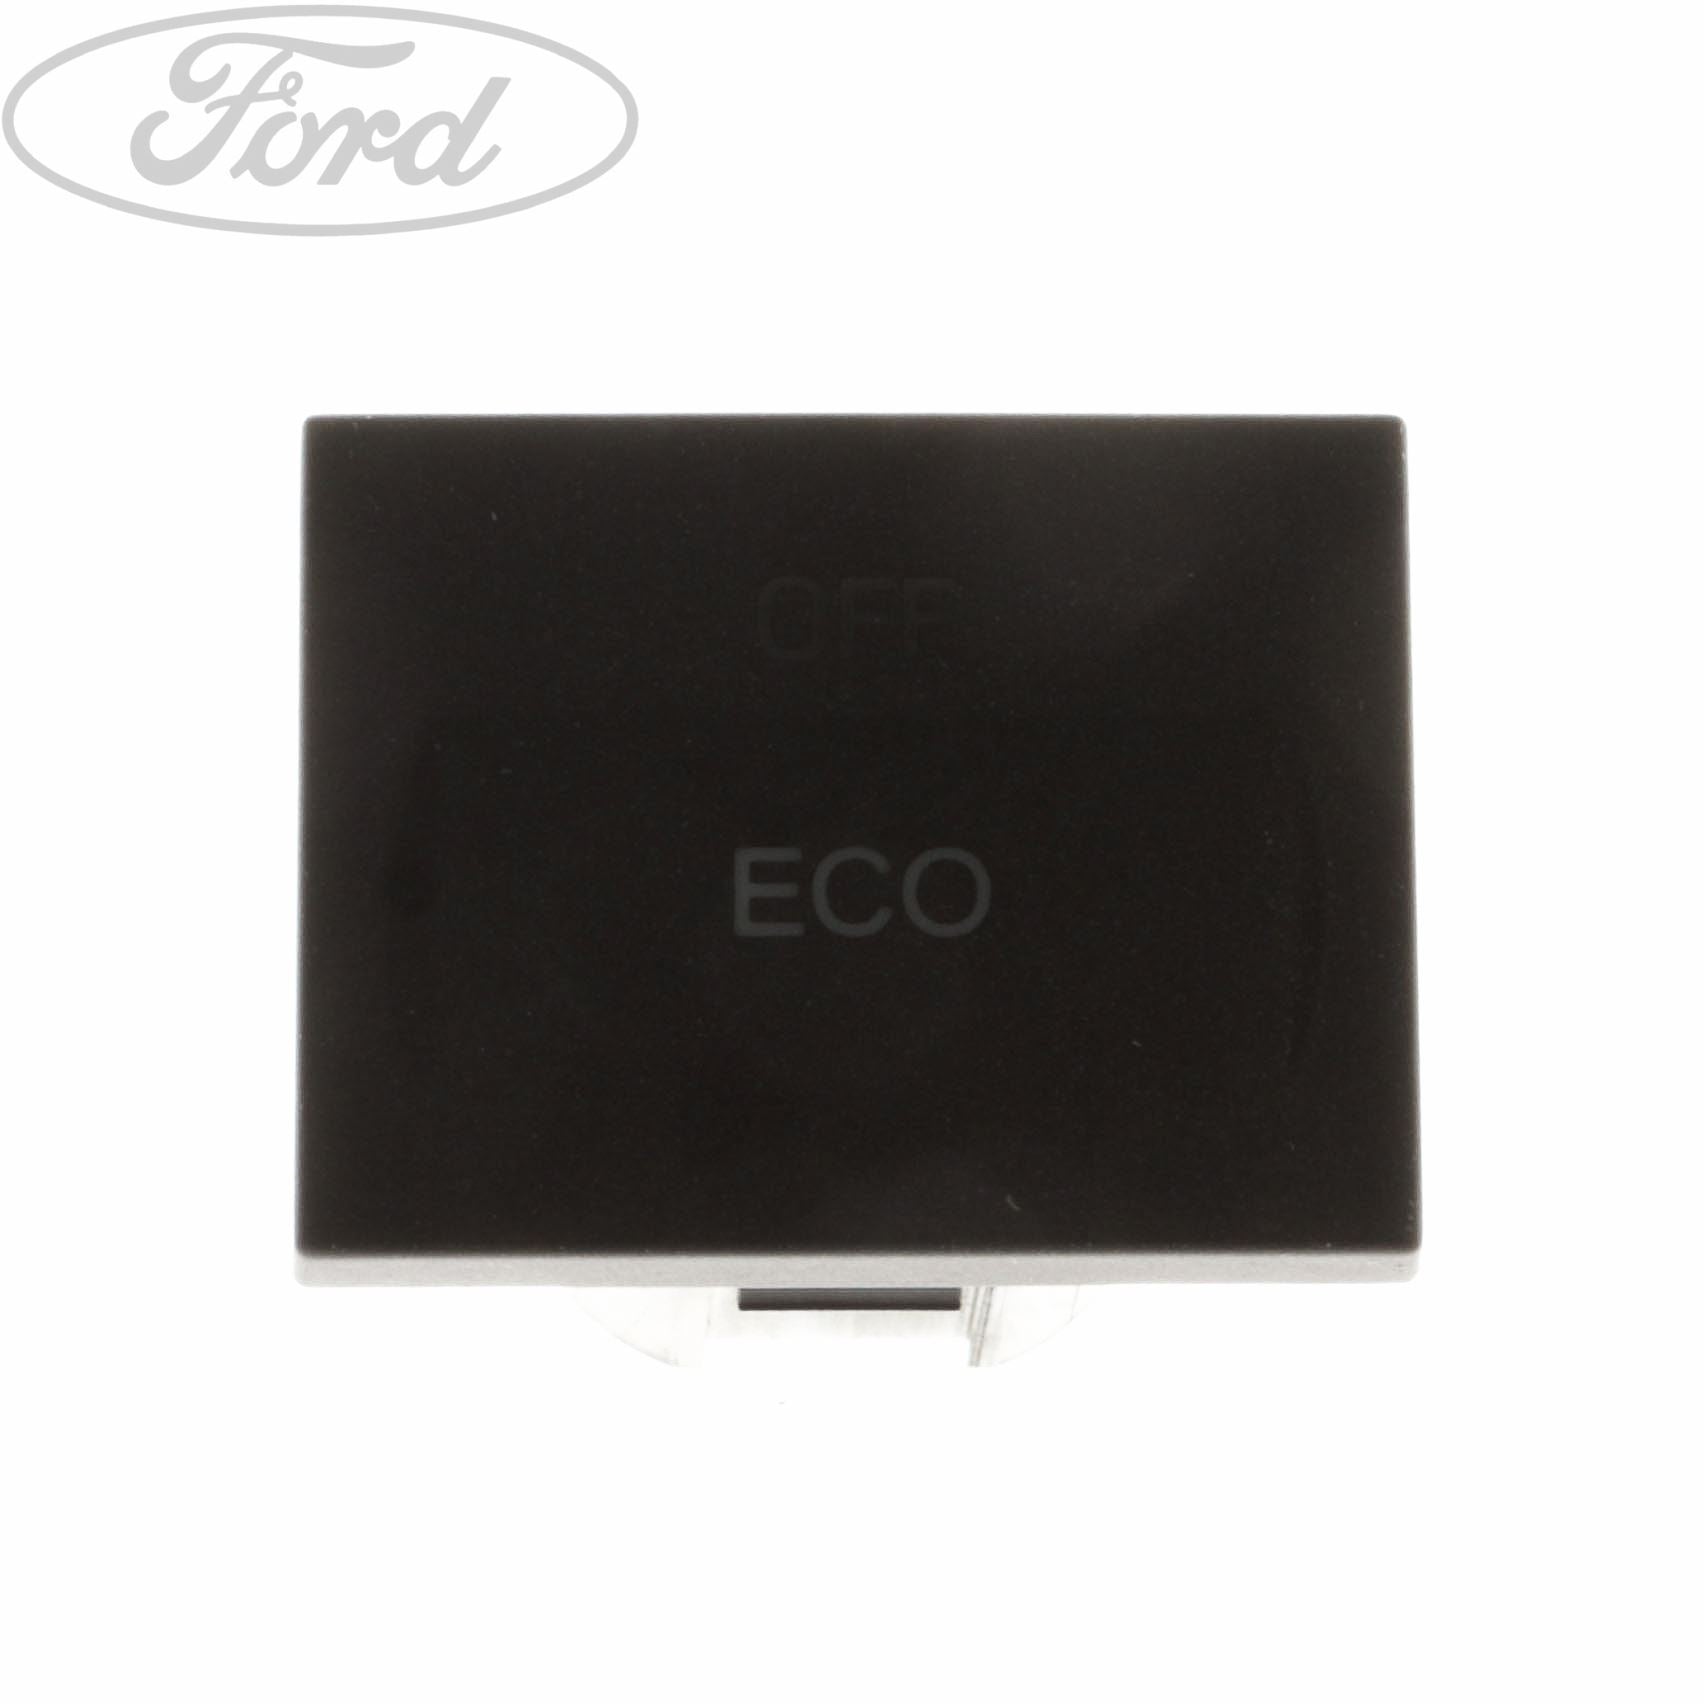 FORD TRANSIT DASHBOARD ECO SWITCH BUTTON Ford Online Shop UK